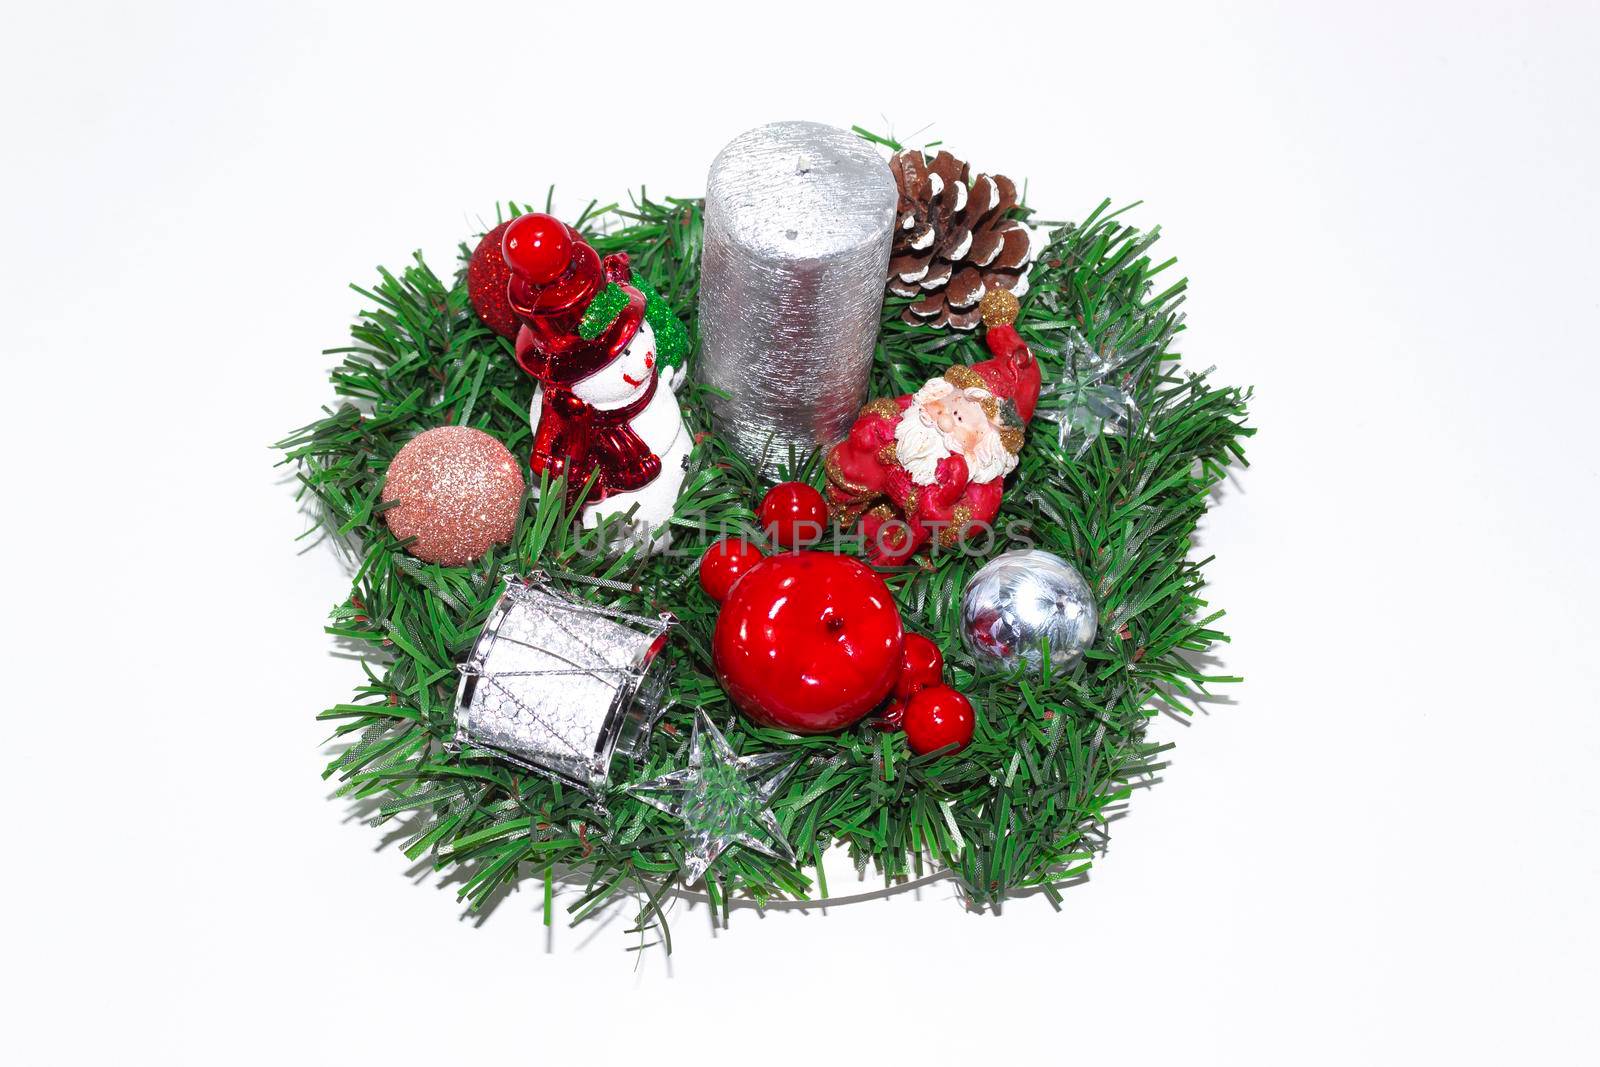 Christmas decorations made at home from several elements